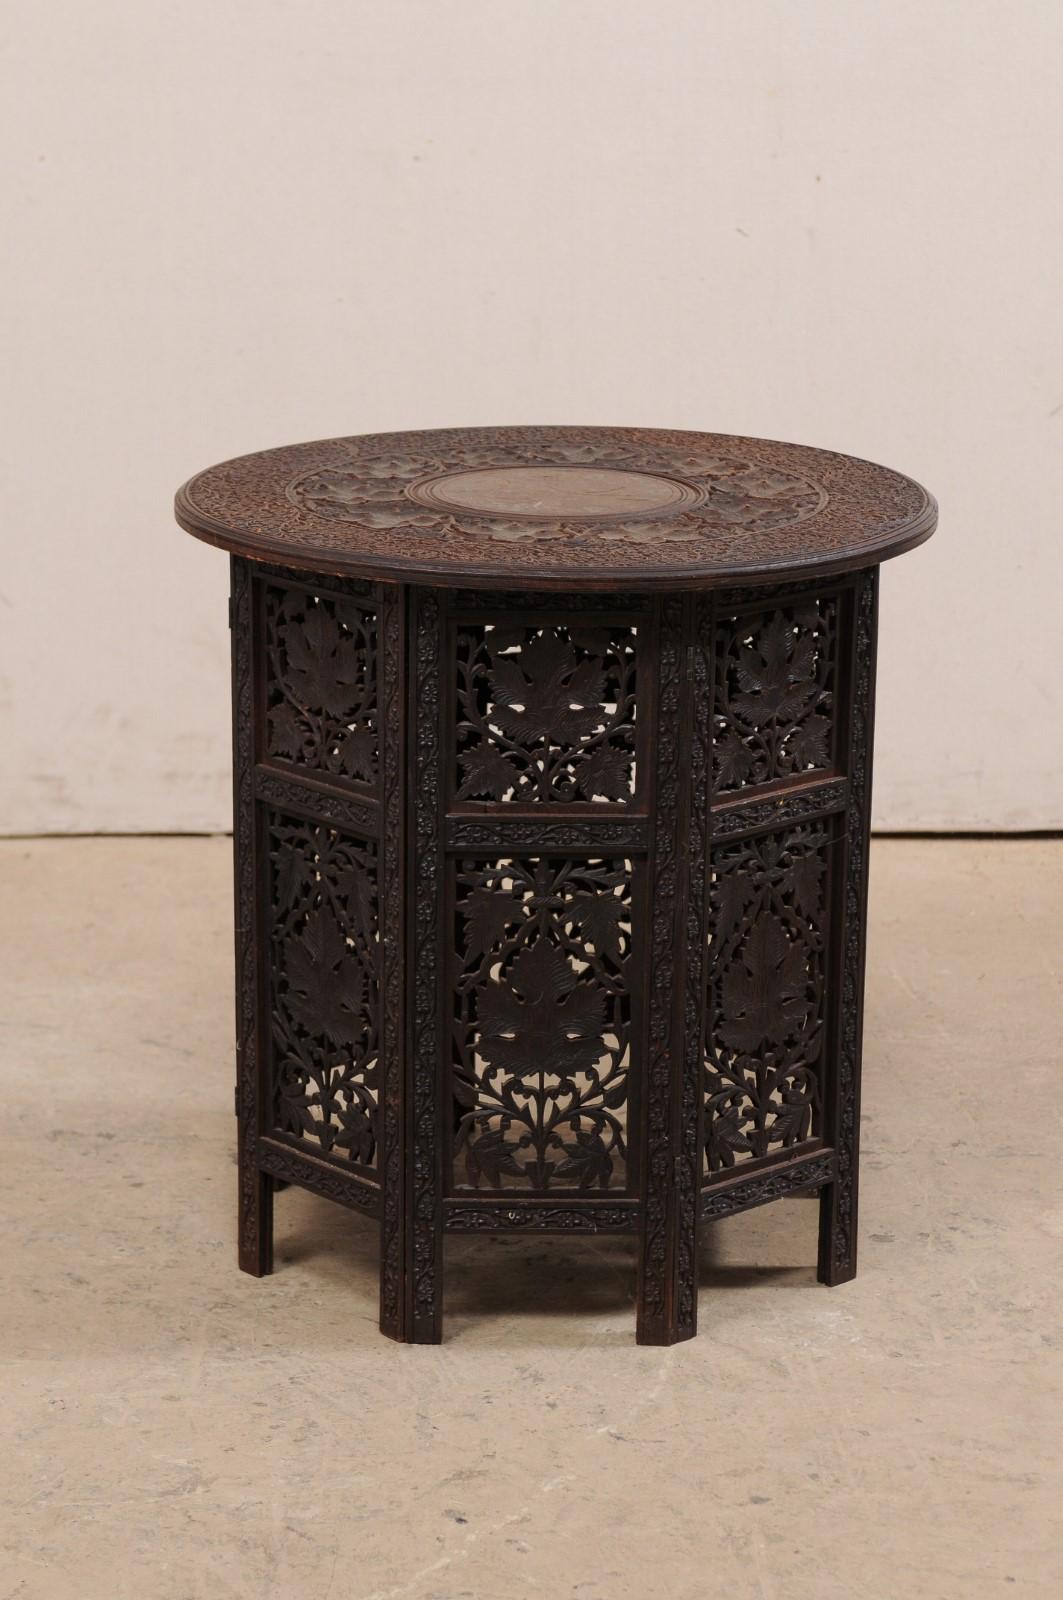 An Anglo-Indian hand carved side table with round top from the mid-20th century. This vintage table from India, with a round-shaped top measuring approximately 24